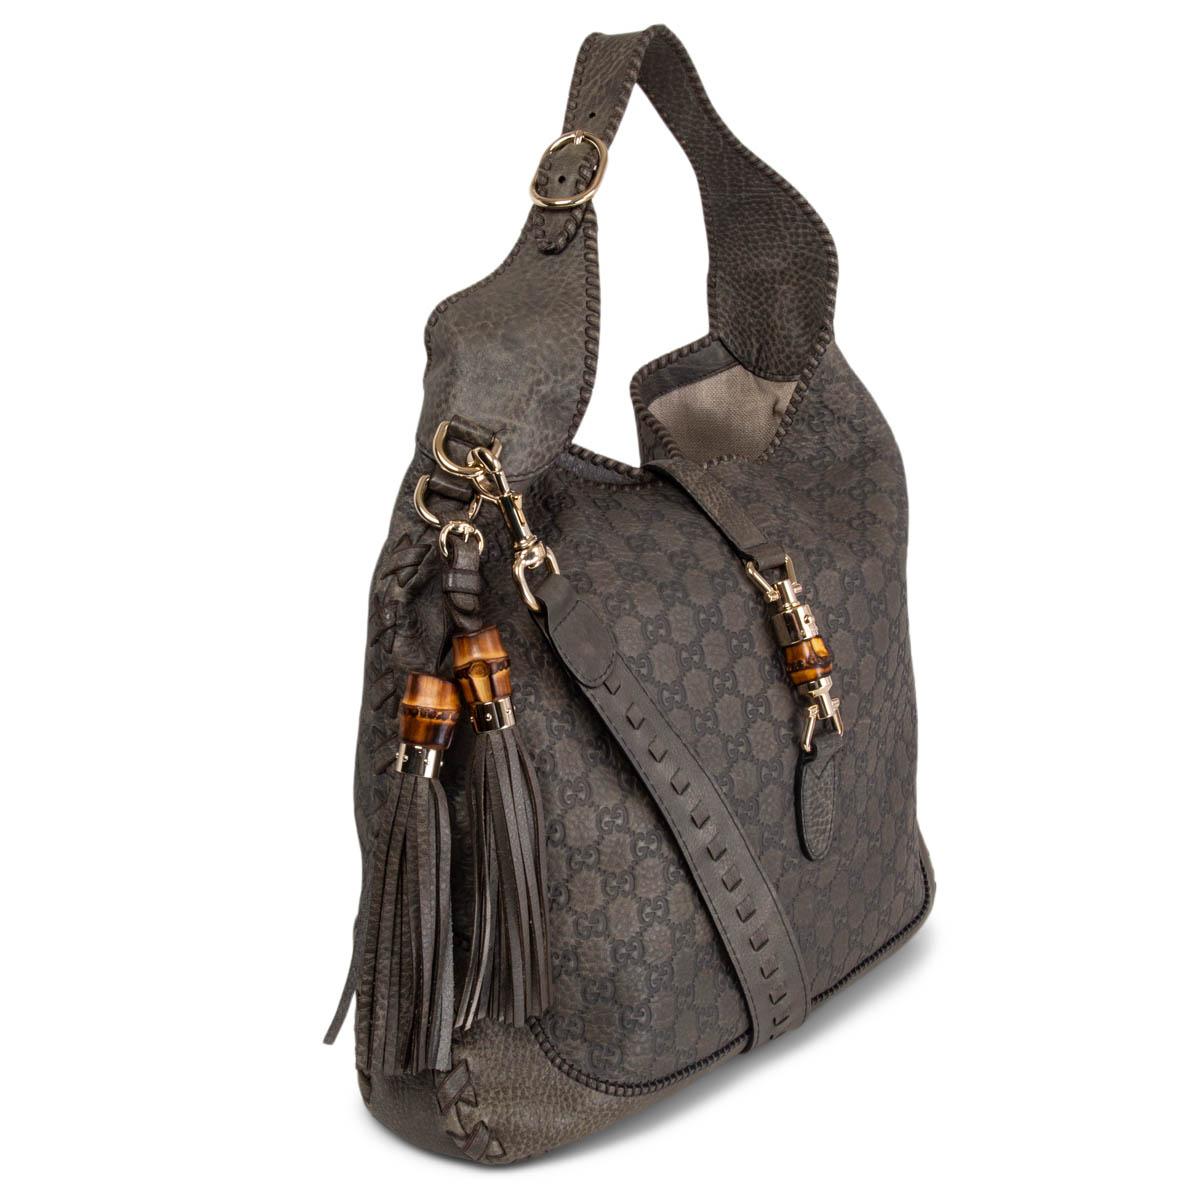 100% authentic Gucci New Jackie Large hobo shoulder bag in petrol-grey grained and Guccissima embossed calfskin featuring light gold-tone hardware and bamboo detail lock. Lined in off-white canvas with one zipper pocket against the back and two